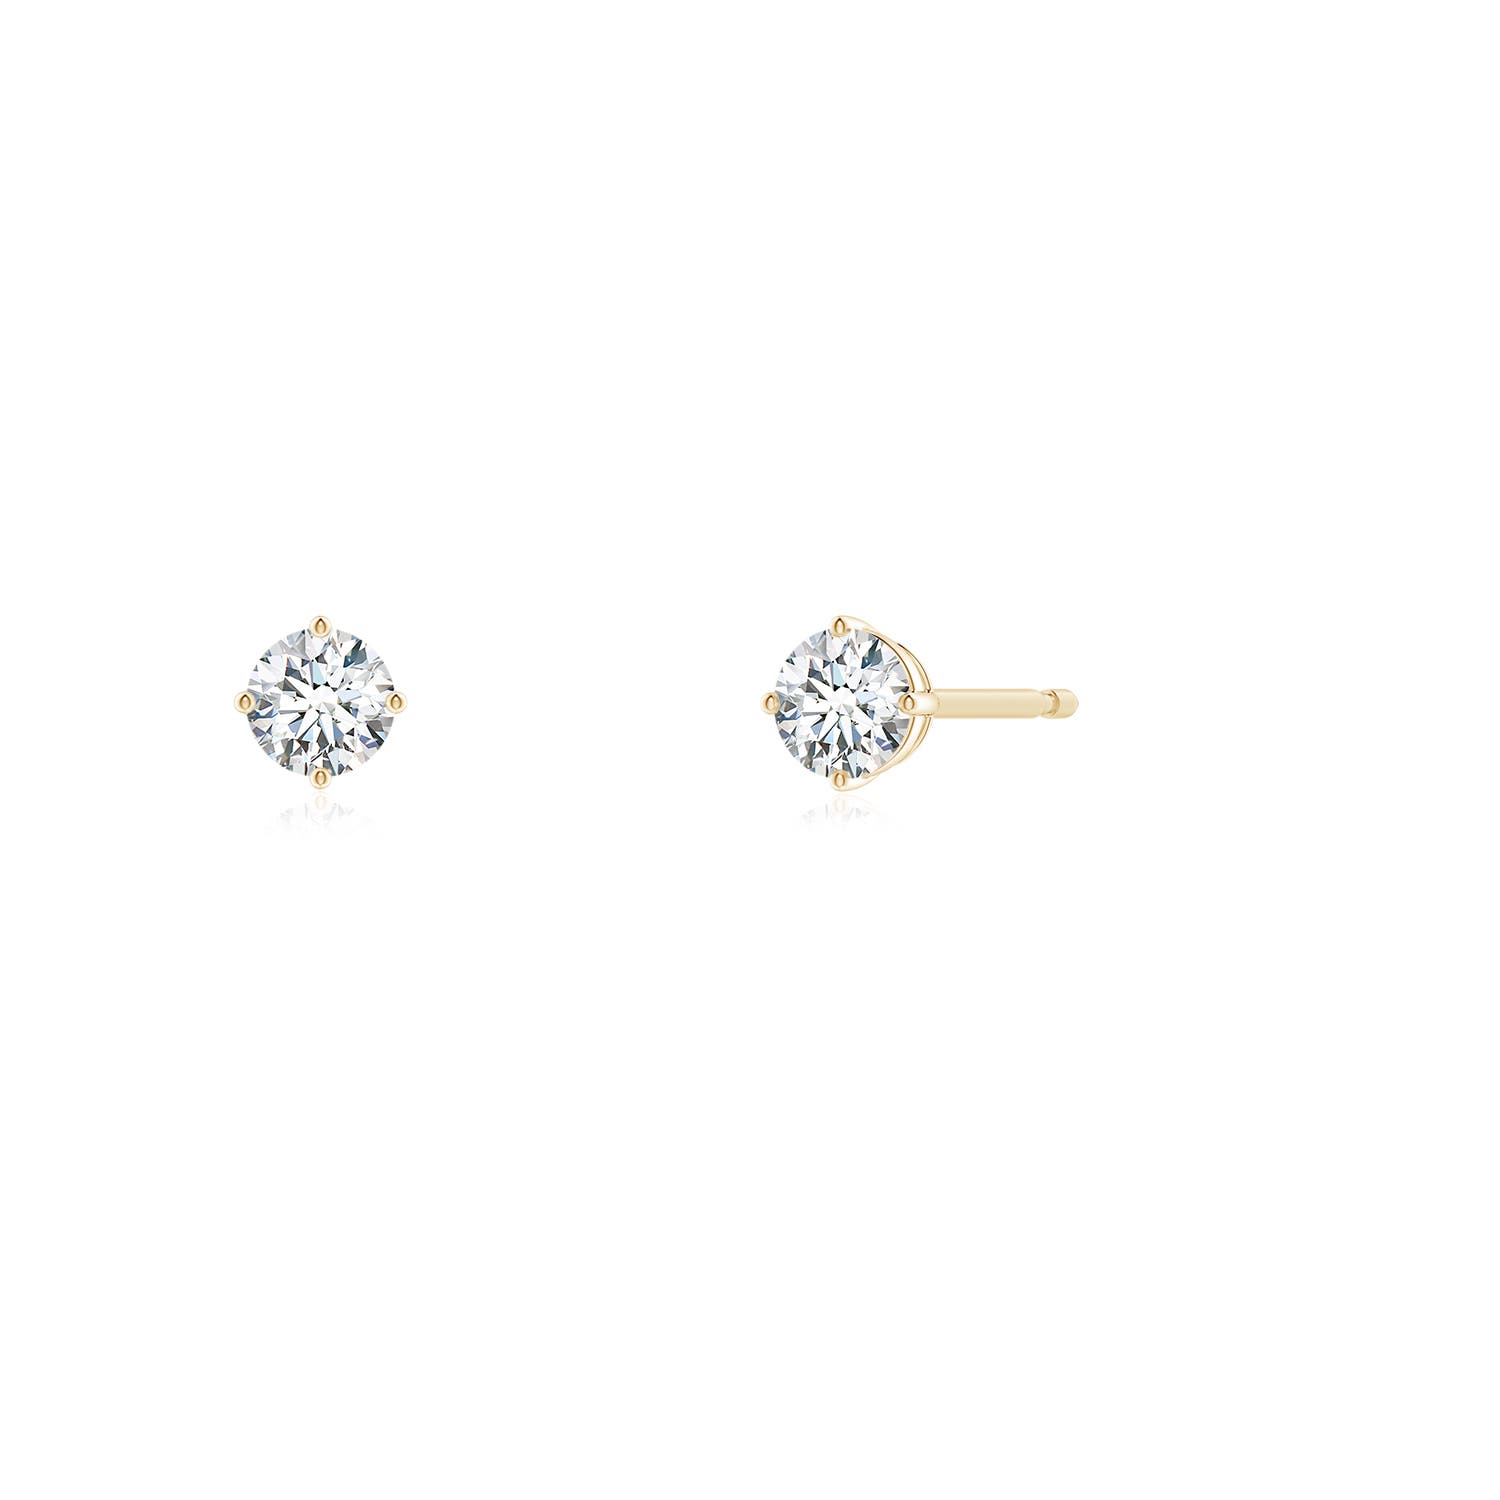 GVS2 / 0.25 CT / 14 KT Yellow Gold